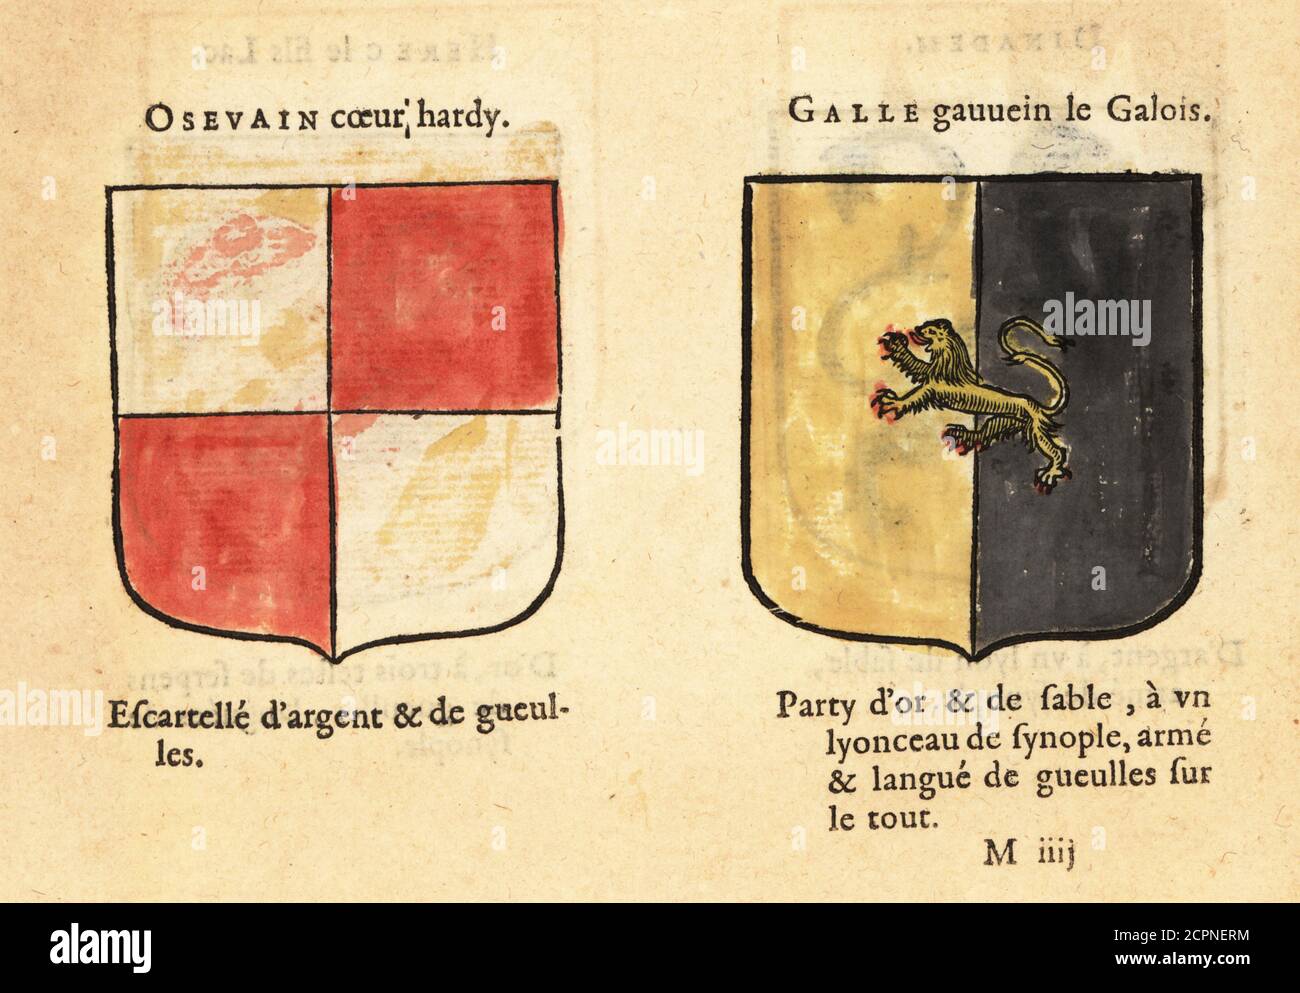 Imaginary coats of arms of King Arthur’s Knights of the Round Table: Osevain with the hardy heart, quartered red and silver, Galegantin with lion cub. Chevaliers de la table ronde: OSEVAIN coeur hardy, GALLE gauuein le Galois. Handcoloured woodblock engraving from Hierosme de Bara’s Le Blason des Armoiries, Chez Rolet Boutonne, Paris, 1628 Stock Photo